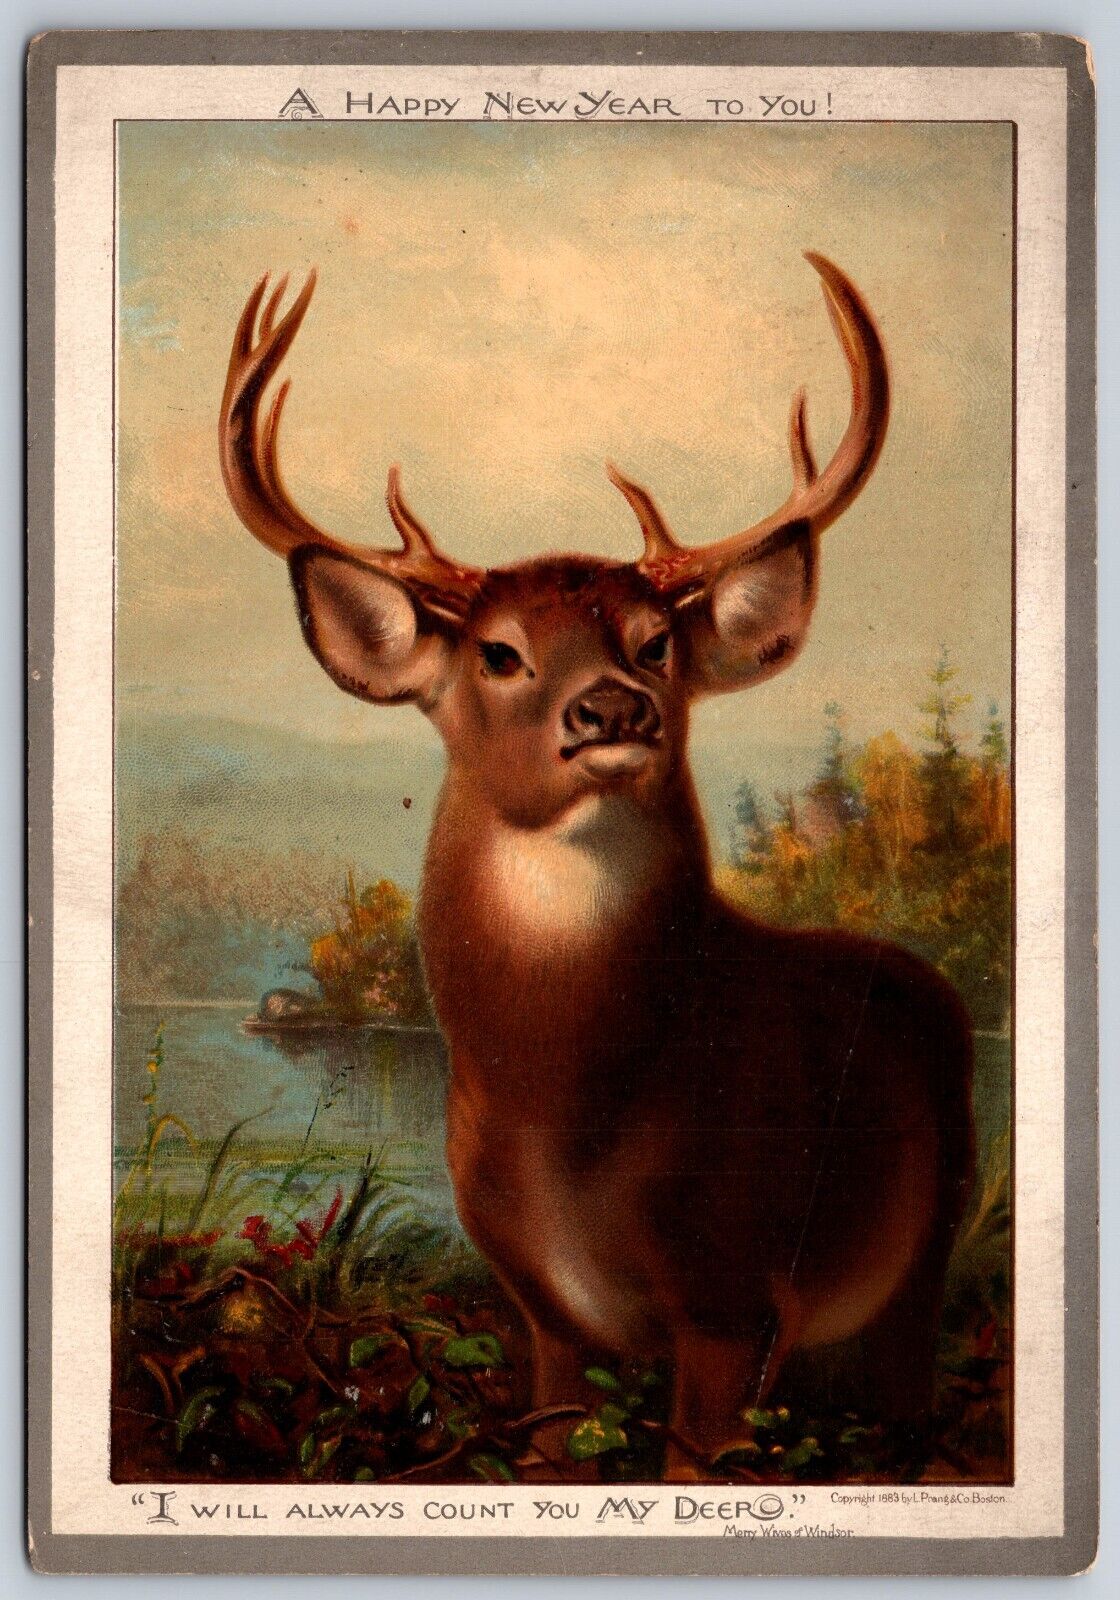 Happy new year, I will always count on you my DEER, Merry Wives of Windsor 1883